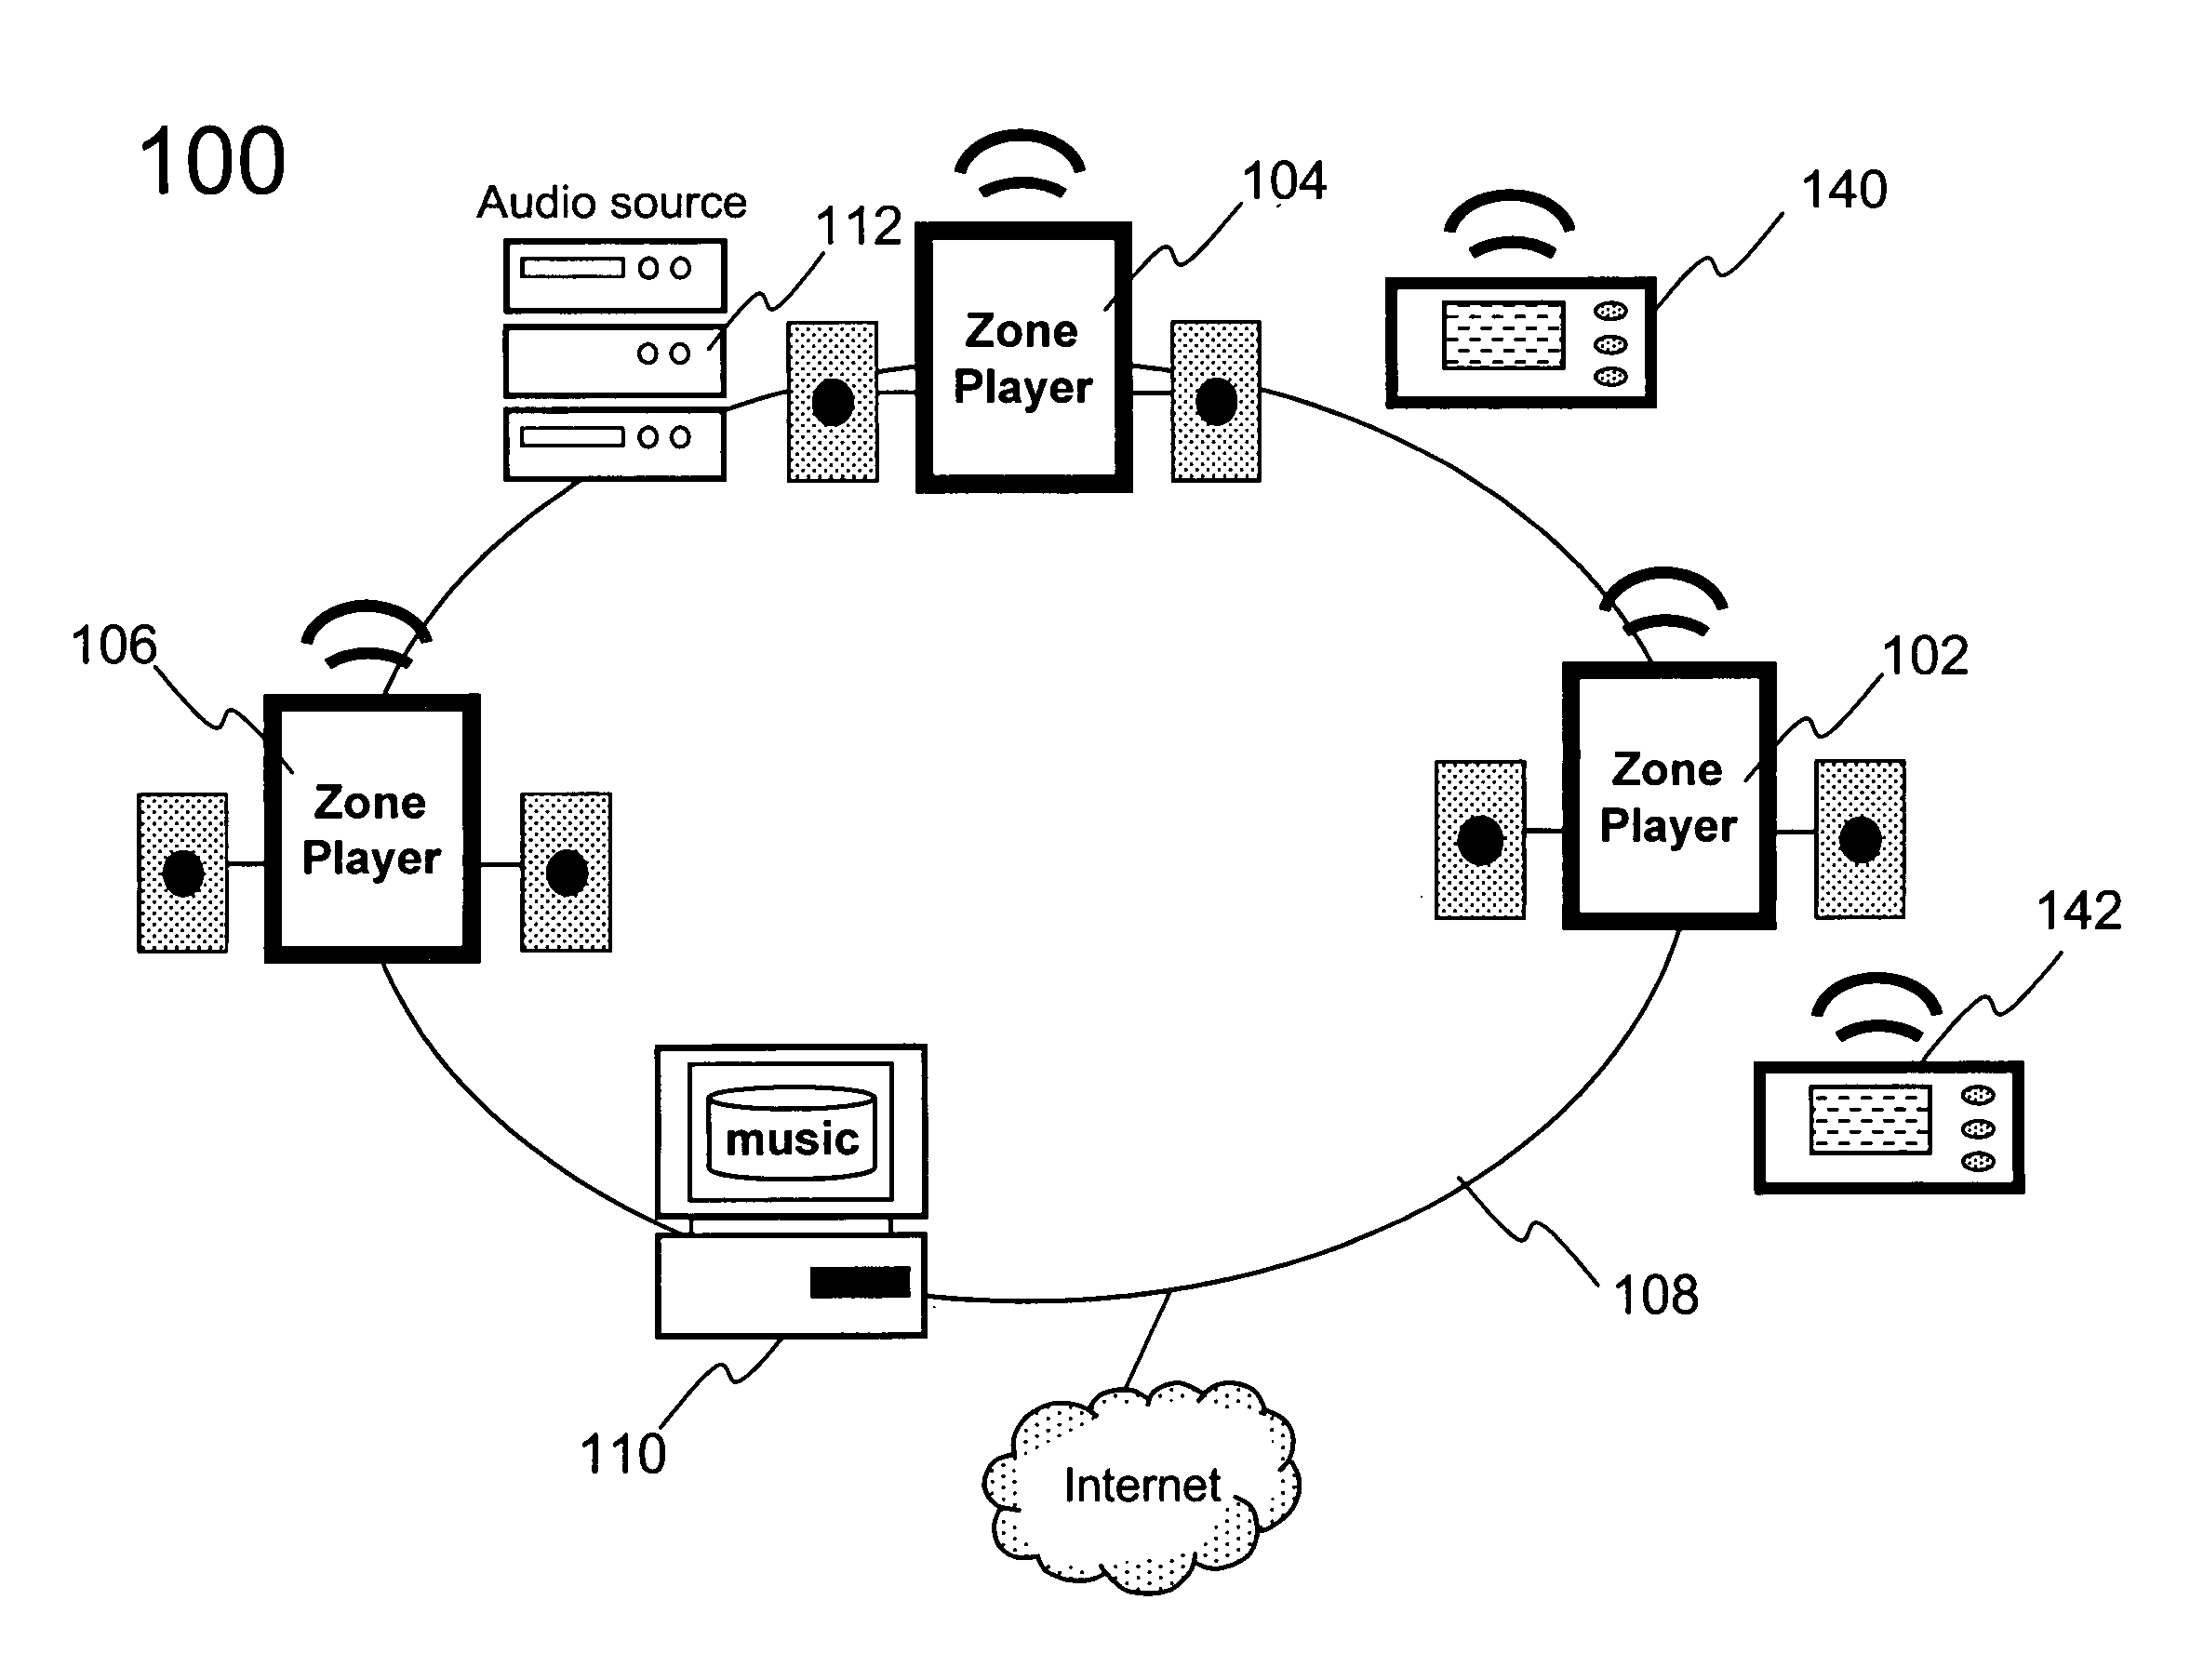 Establishing a secure wireless network with minimum human intervention